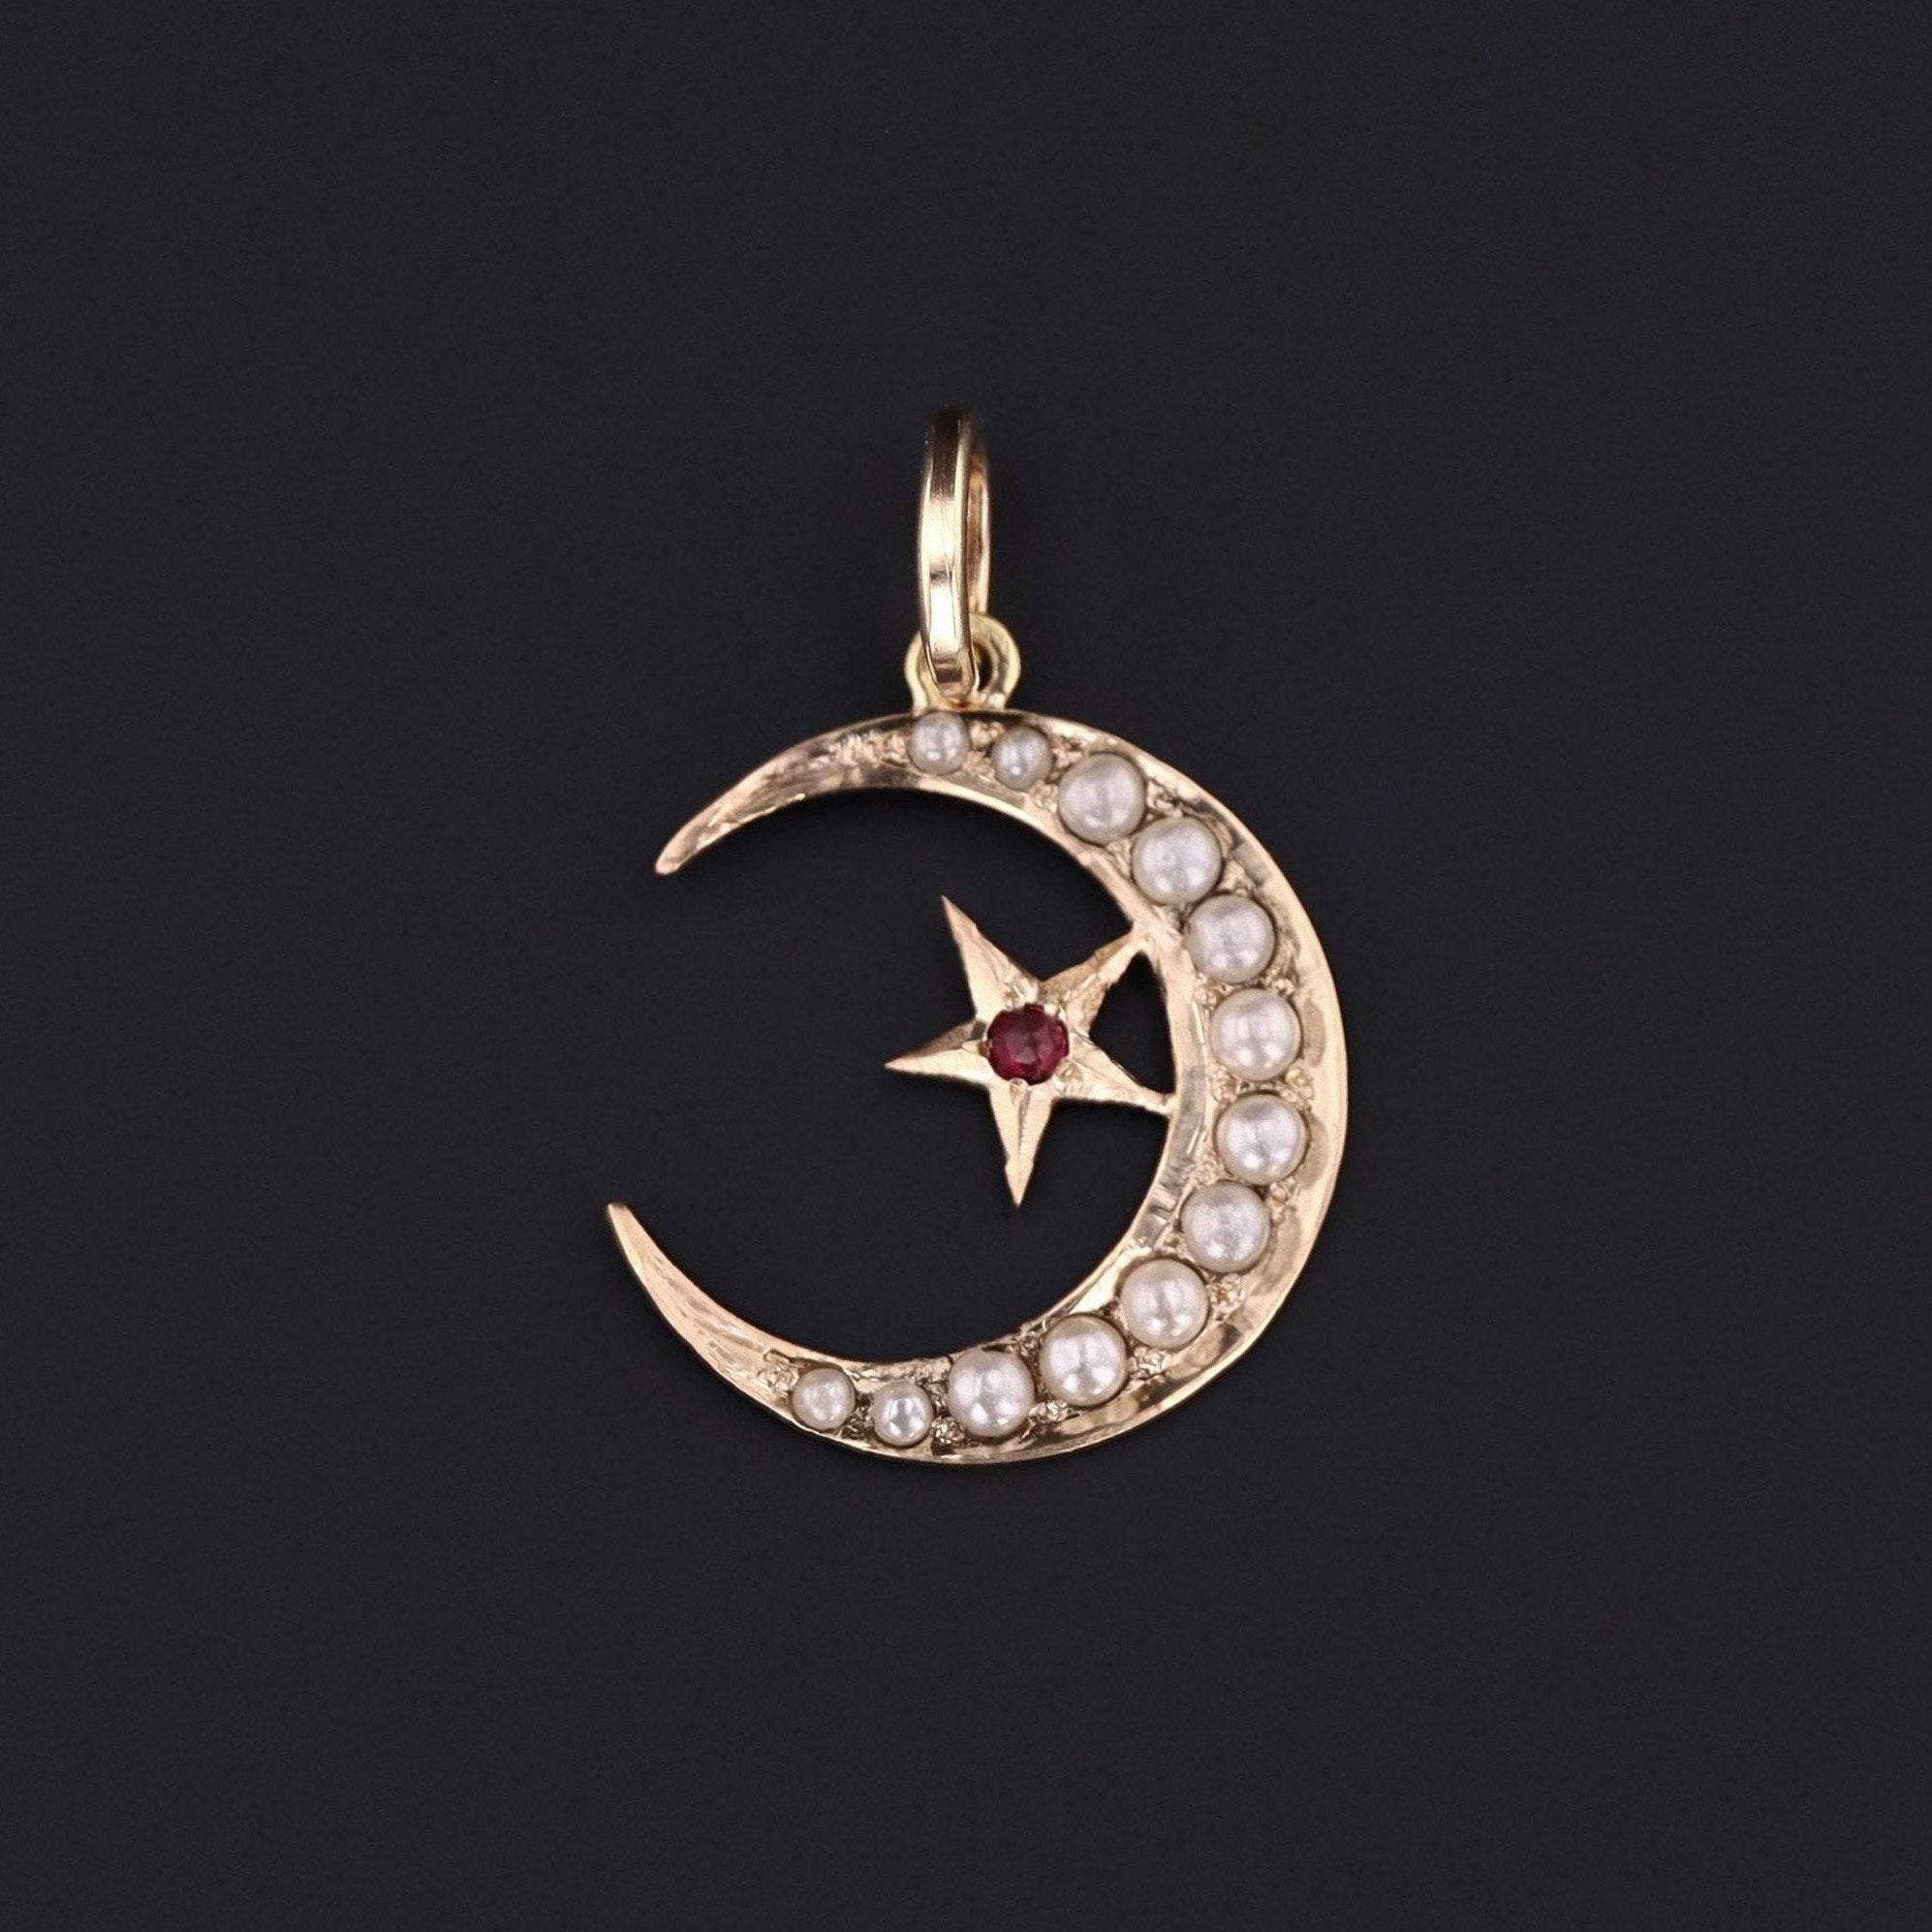 Crescent Moon Pendant | Antique Crescent & Star Pendant | 10k Gold and Simulated Pearl Pendant | Pin Conversion